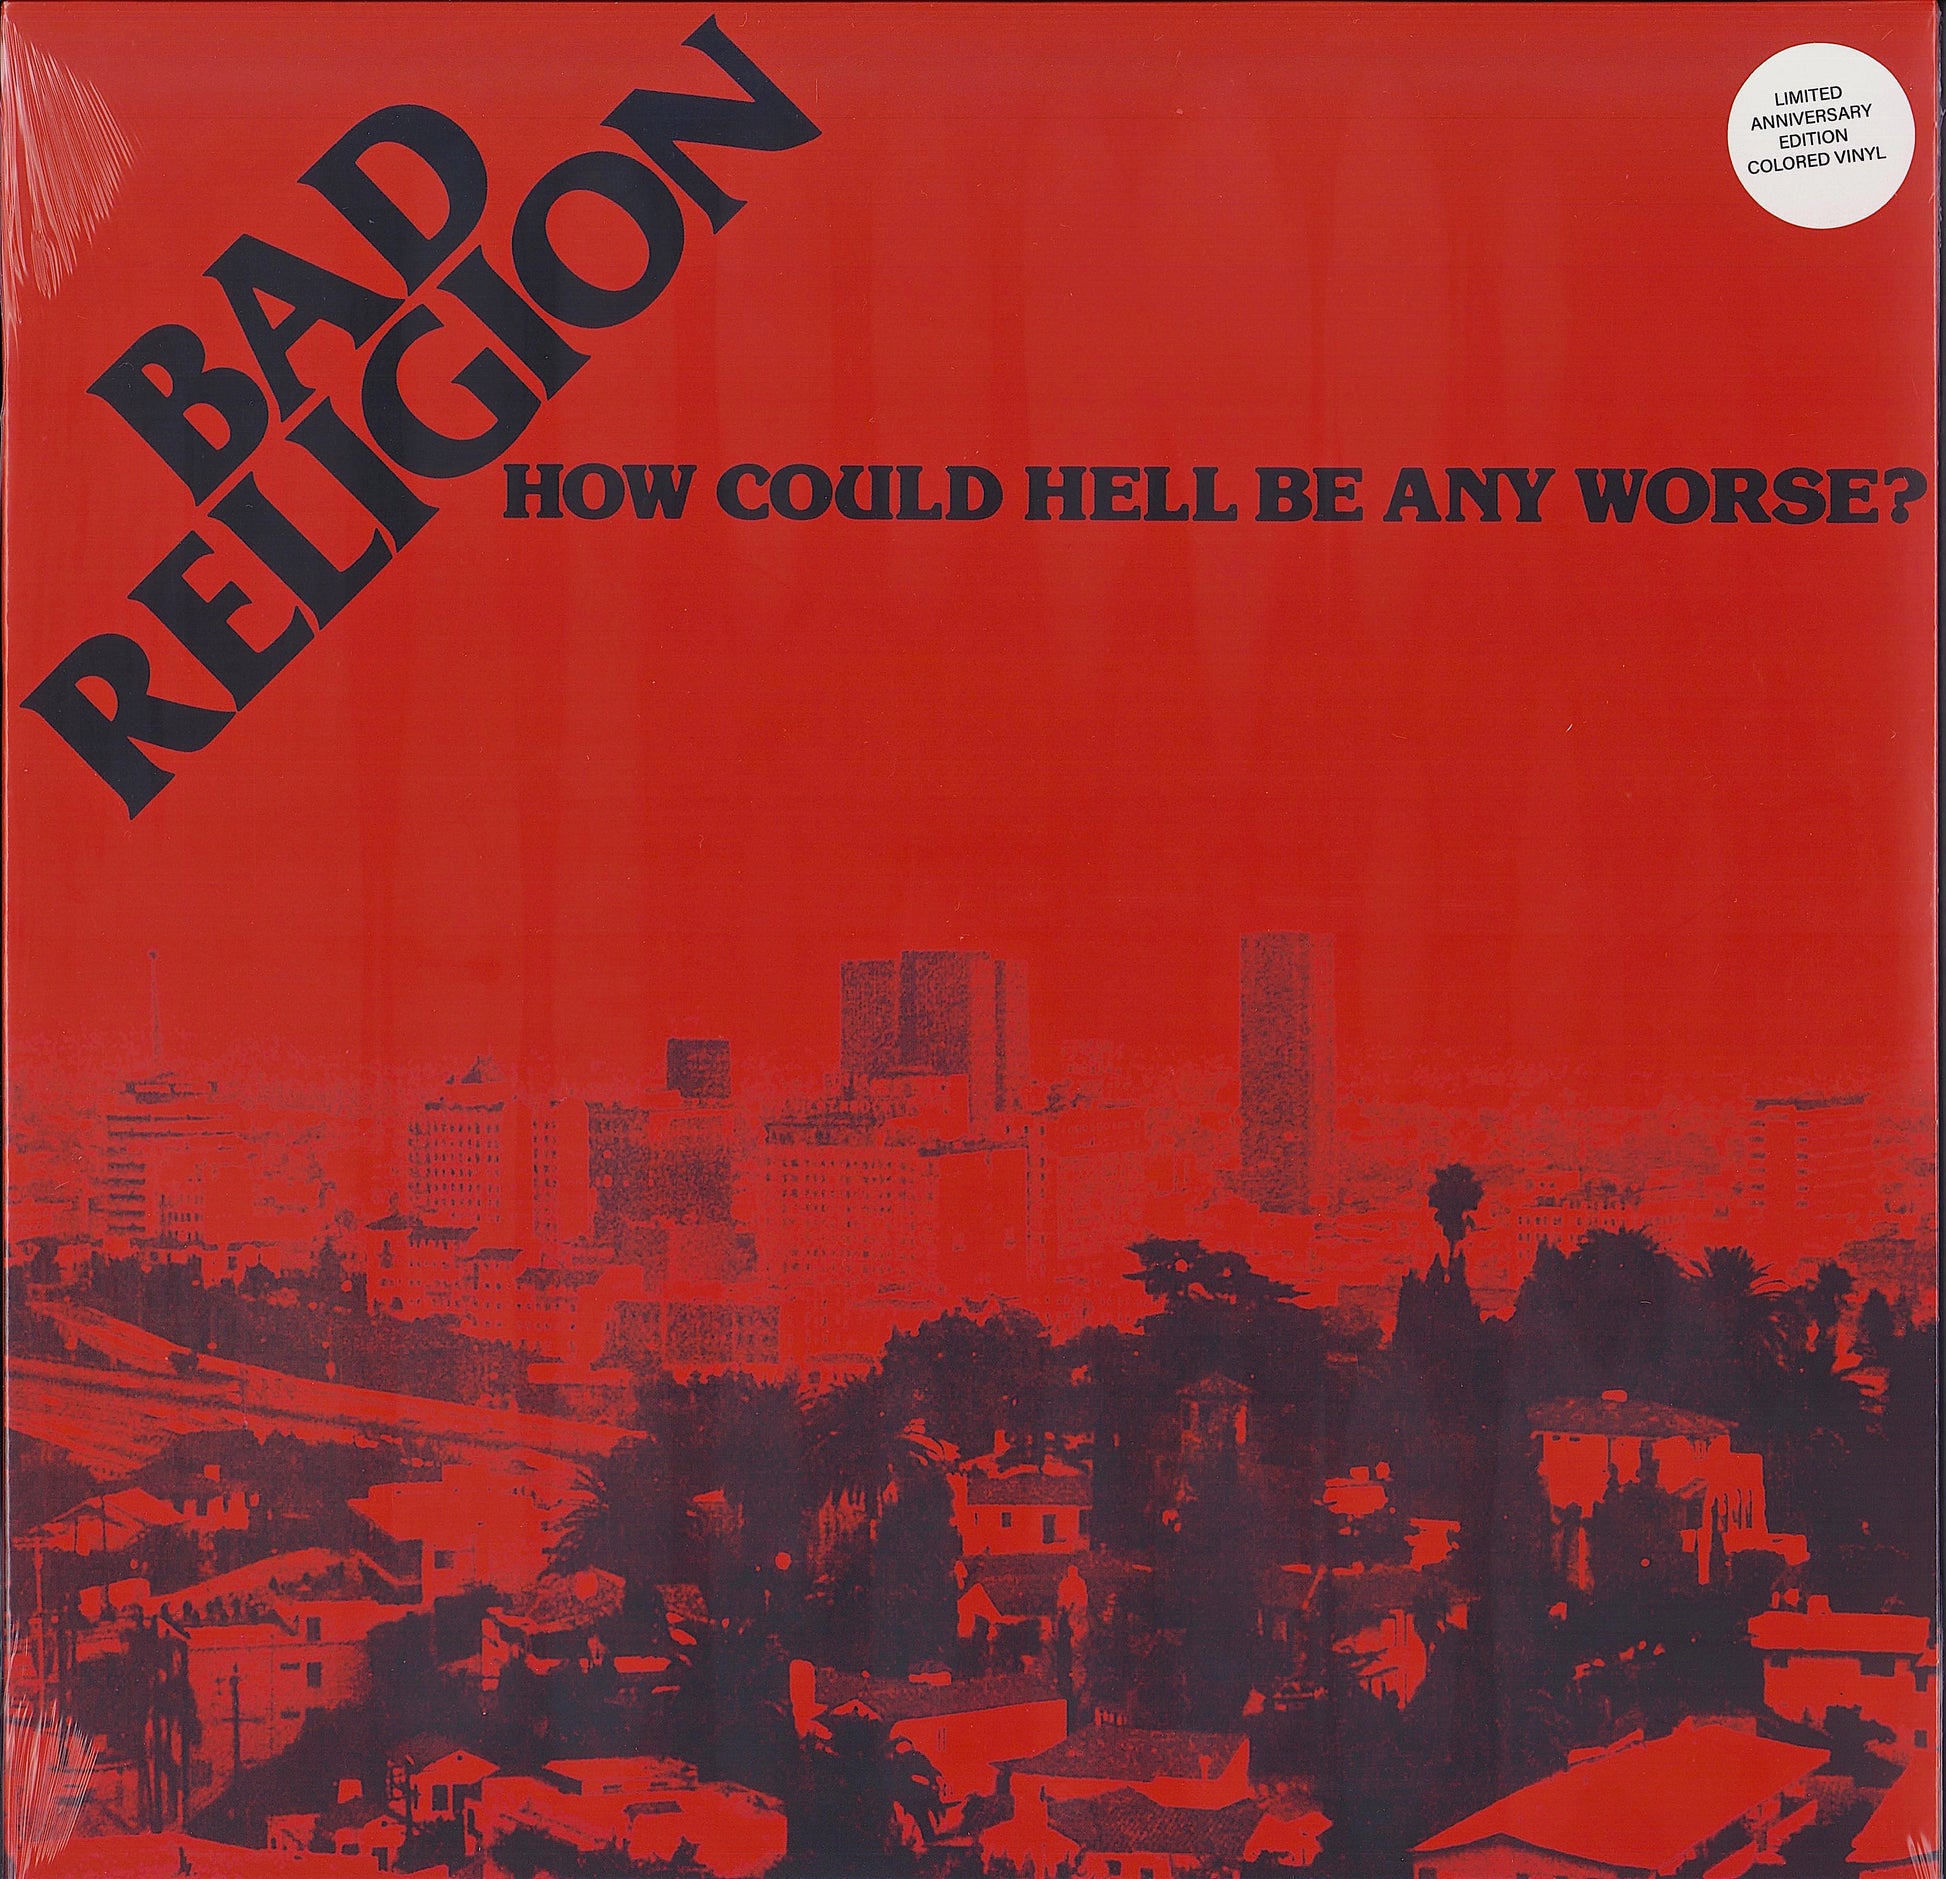 Bad Religion ‎– How Could Hell Be Any Worse? - 40th Anniversary Edition White Vinyl LP